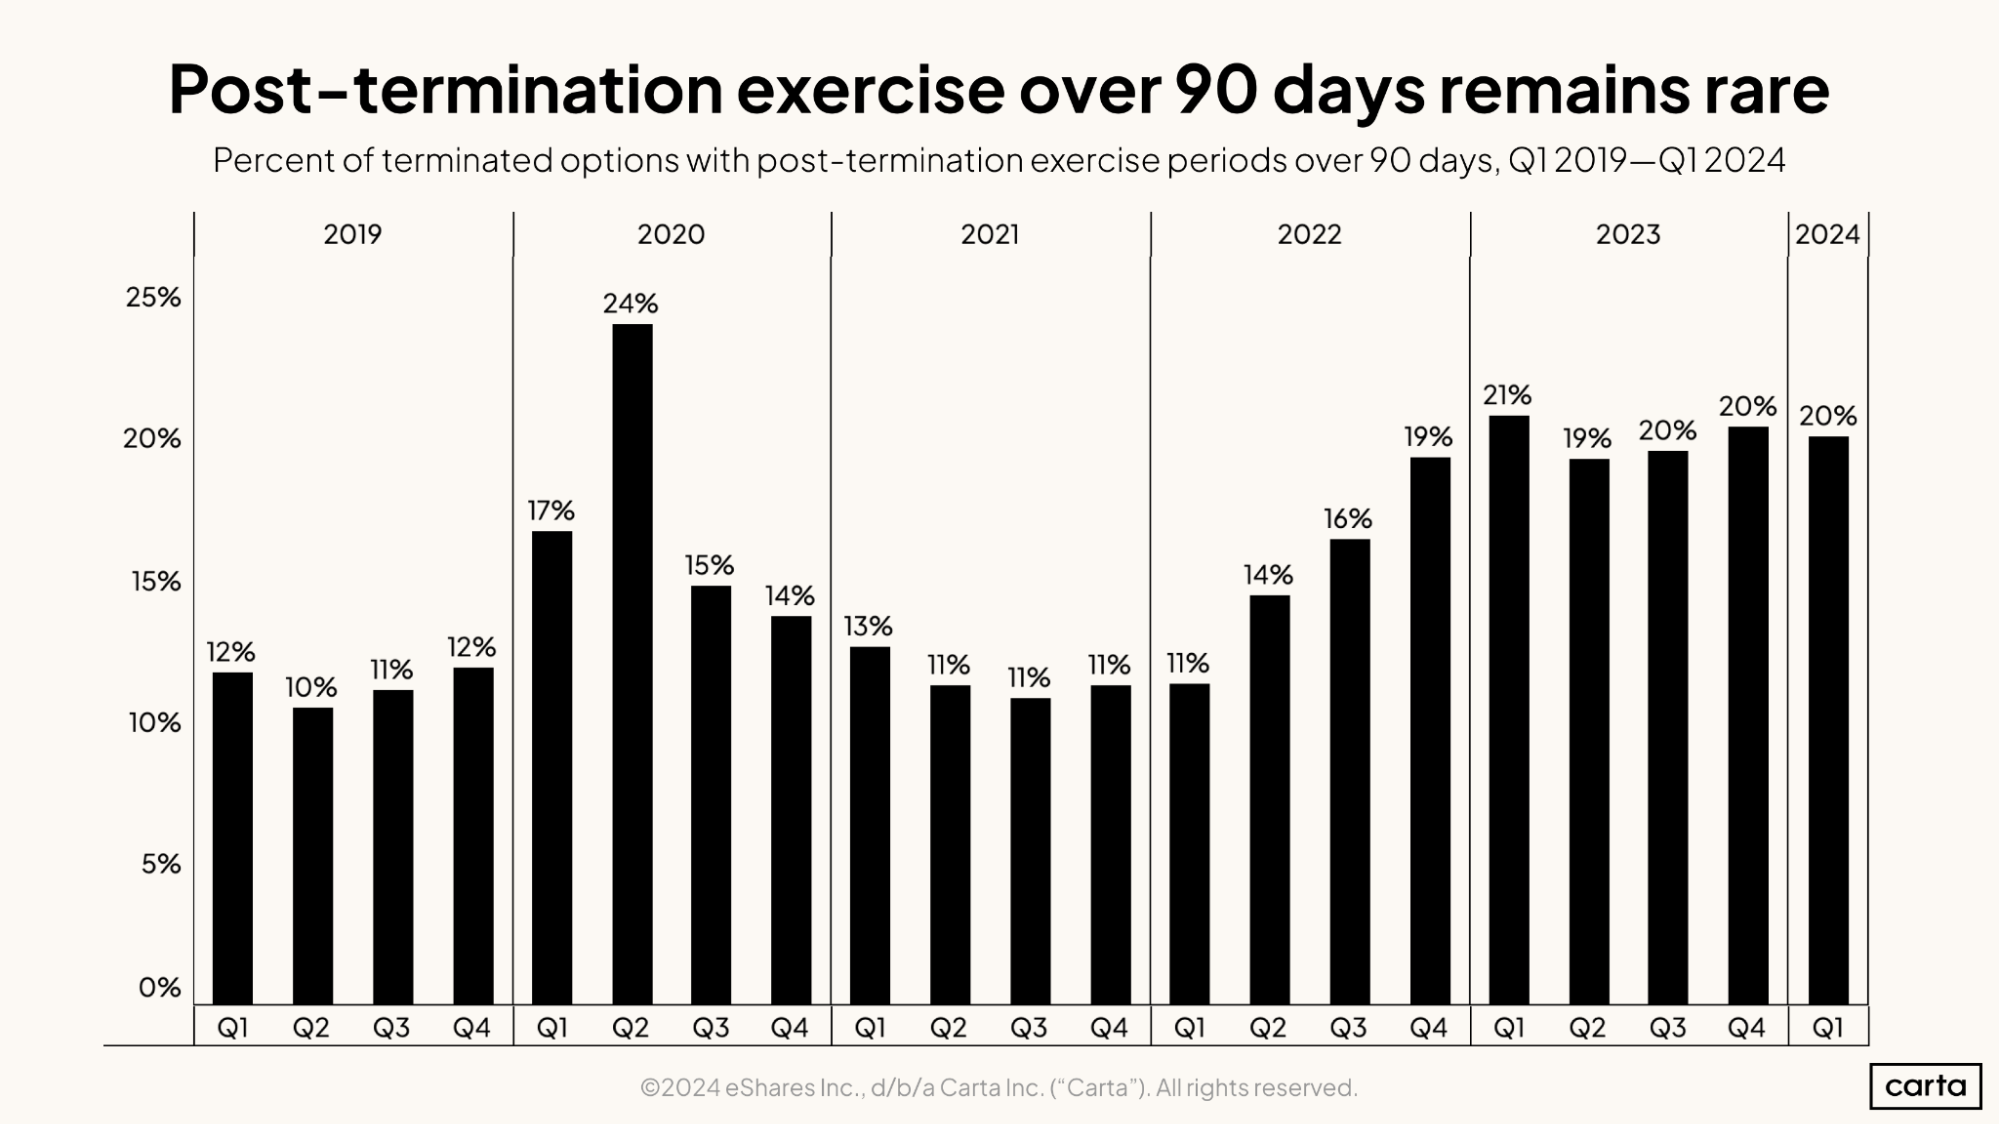 Post-termination exercise over 90 days remains rare